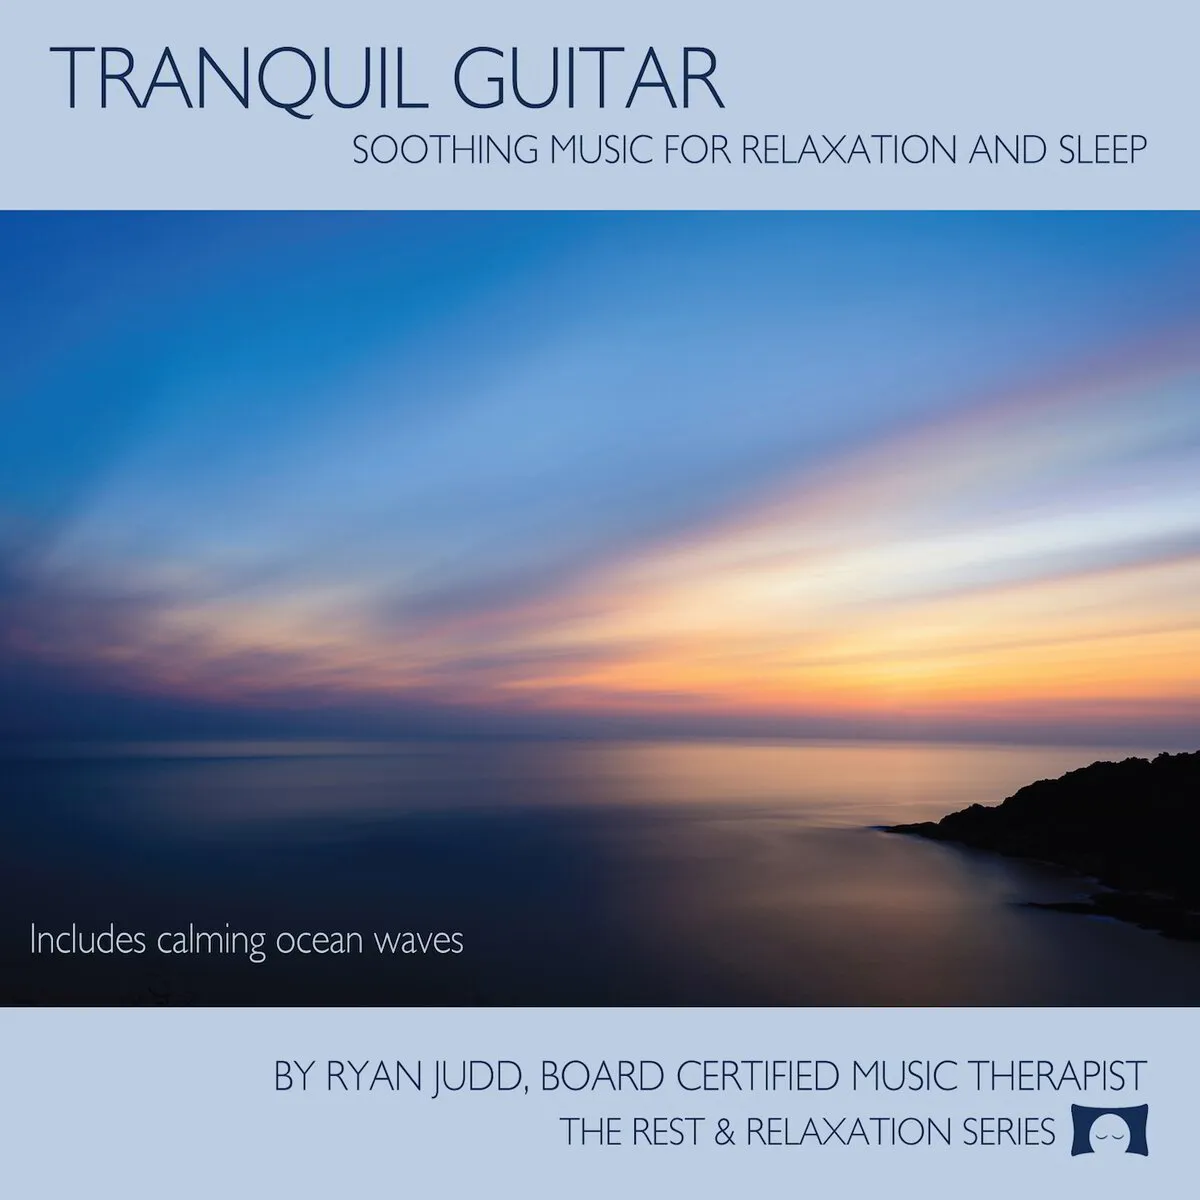 Tranquil Guitar - Physical CD